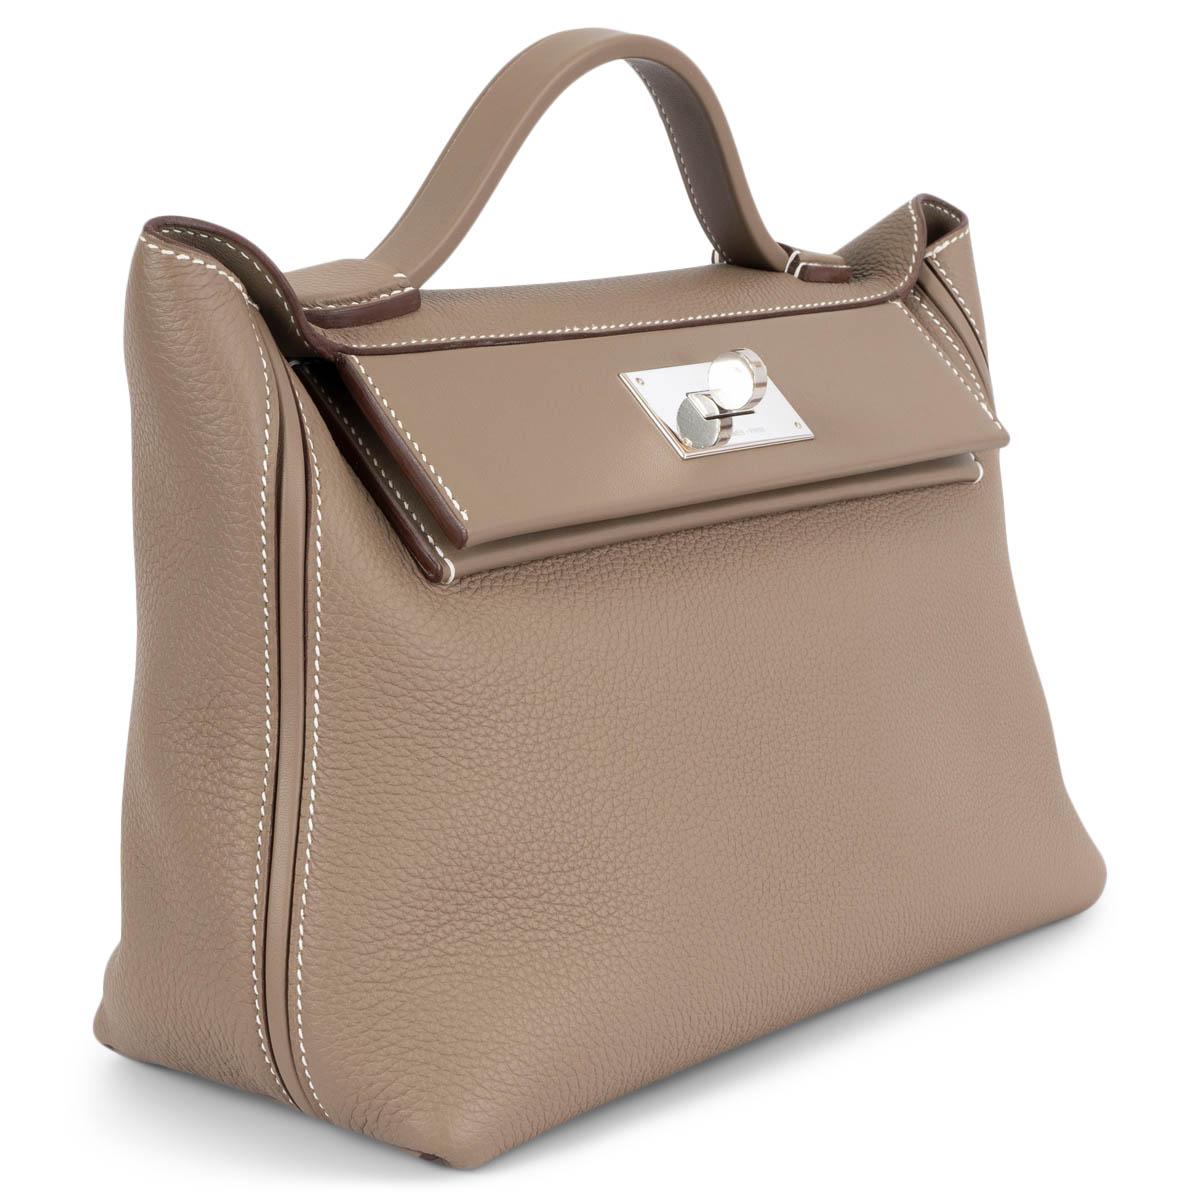 100% authentic Hermès 24/24 29 Bag in Etoupe Togo and Swift leather with a slip pocket at the back. Opens with a turn-lock in Palladium and is lined in Etoupe Swift with one zipper pocket against the back. Has been carried once or twice and is in